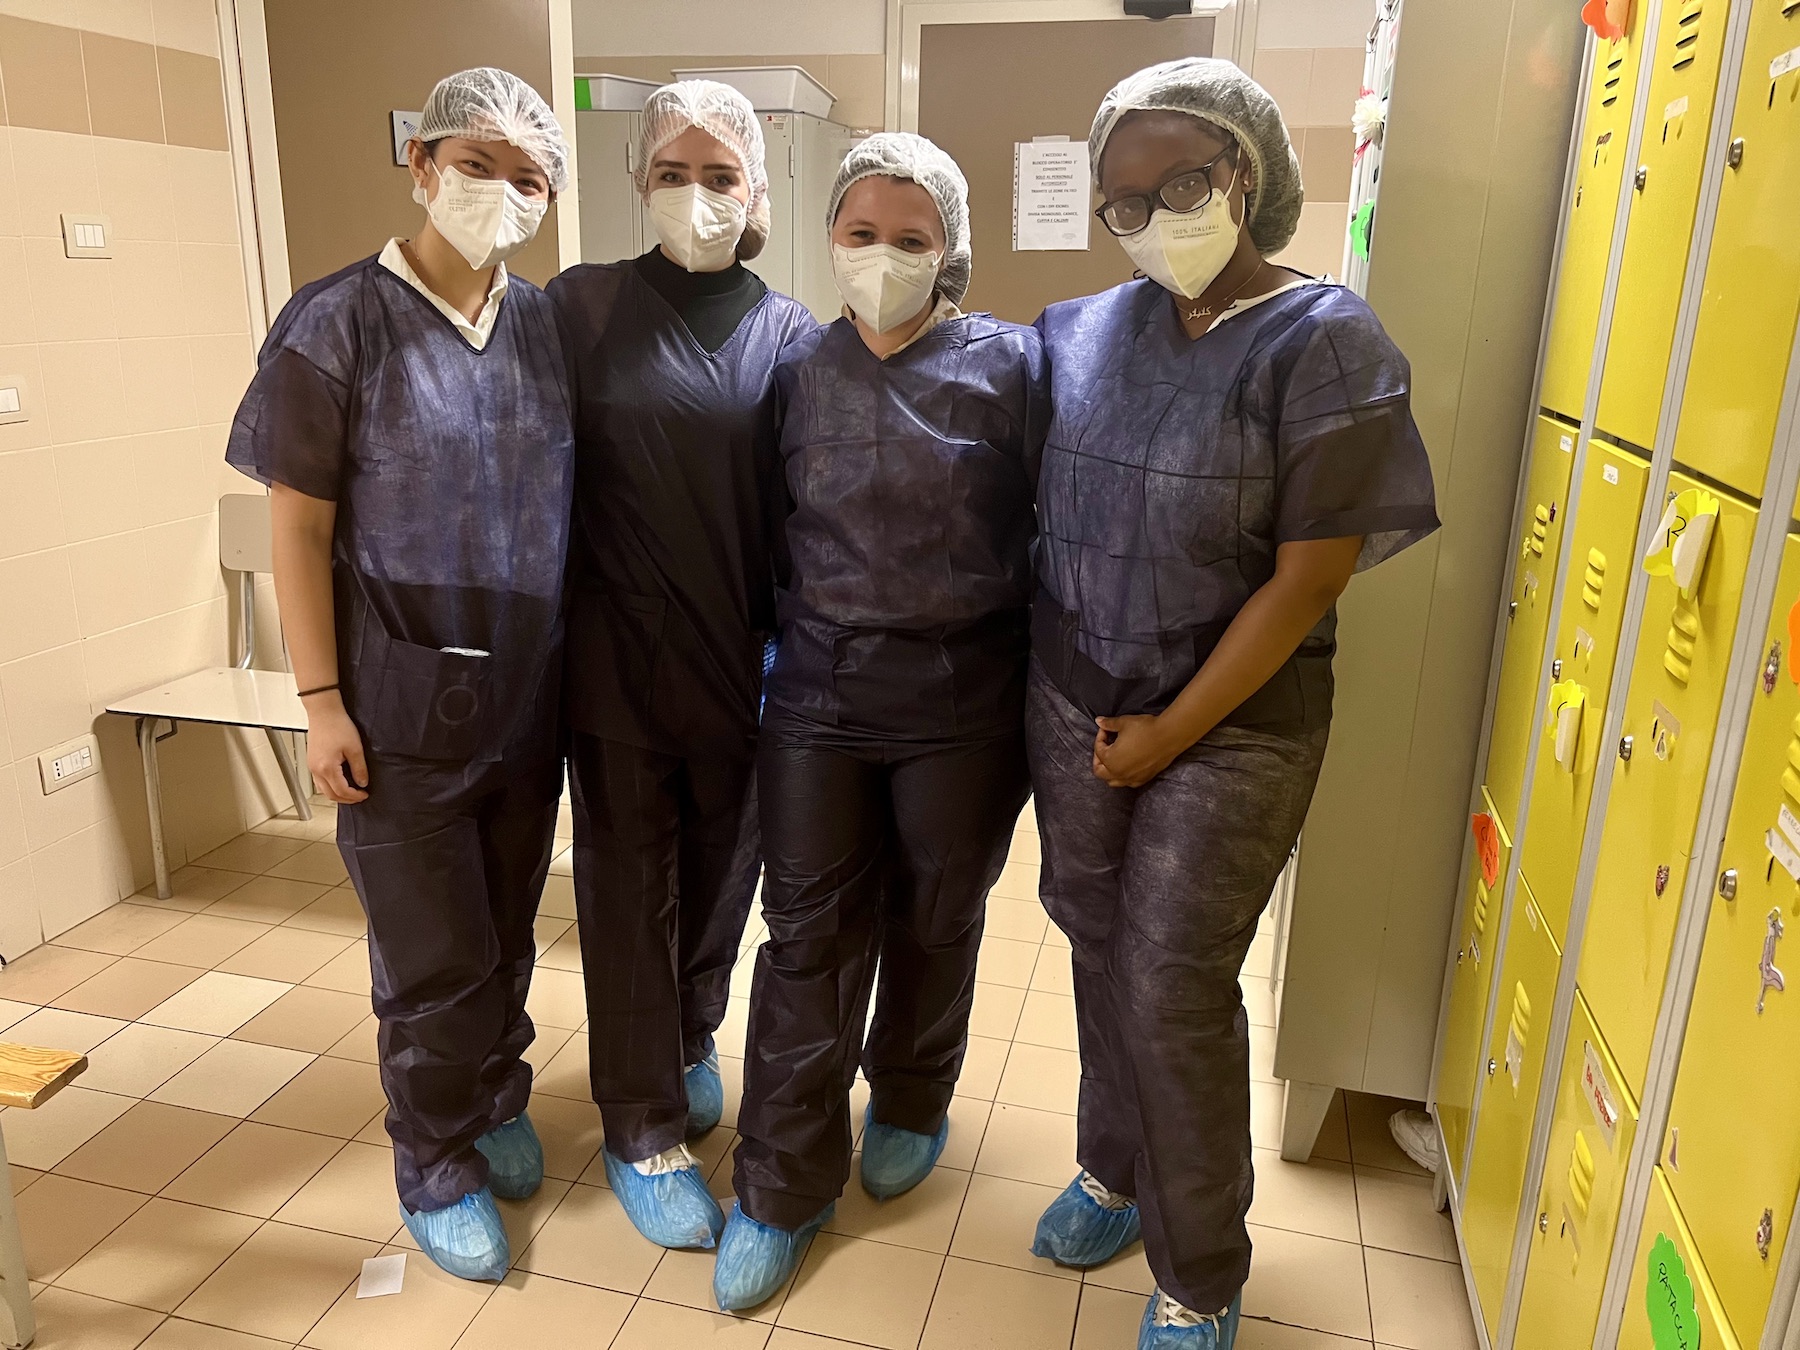 Tech students Jaycie Hitt (second from left) and Emma Carter (second from right) before they scrub in to assist with a surgery at an Italian hospital.